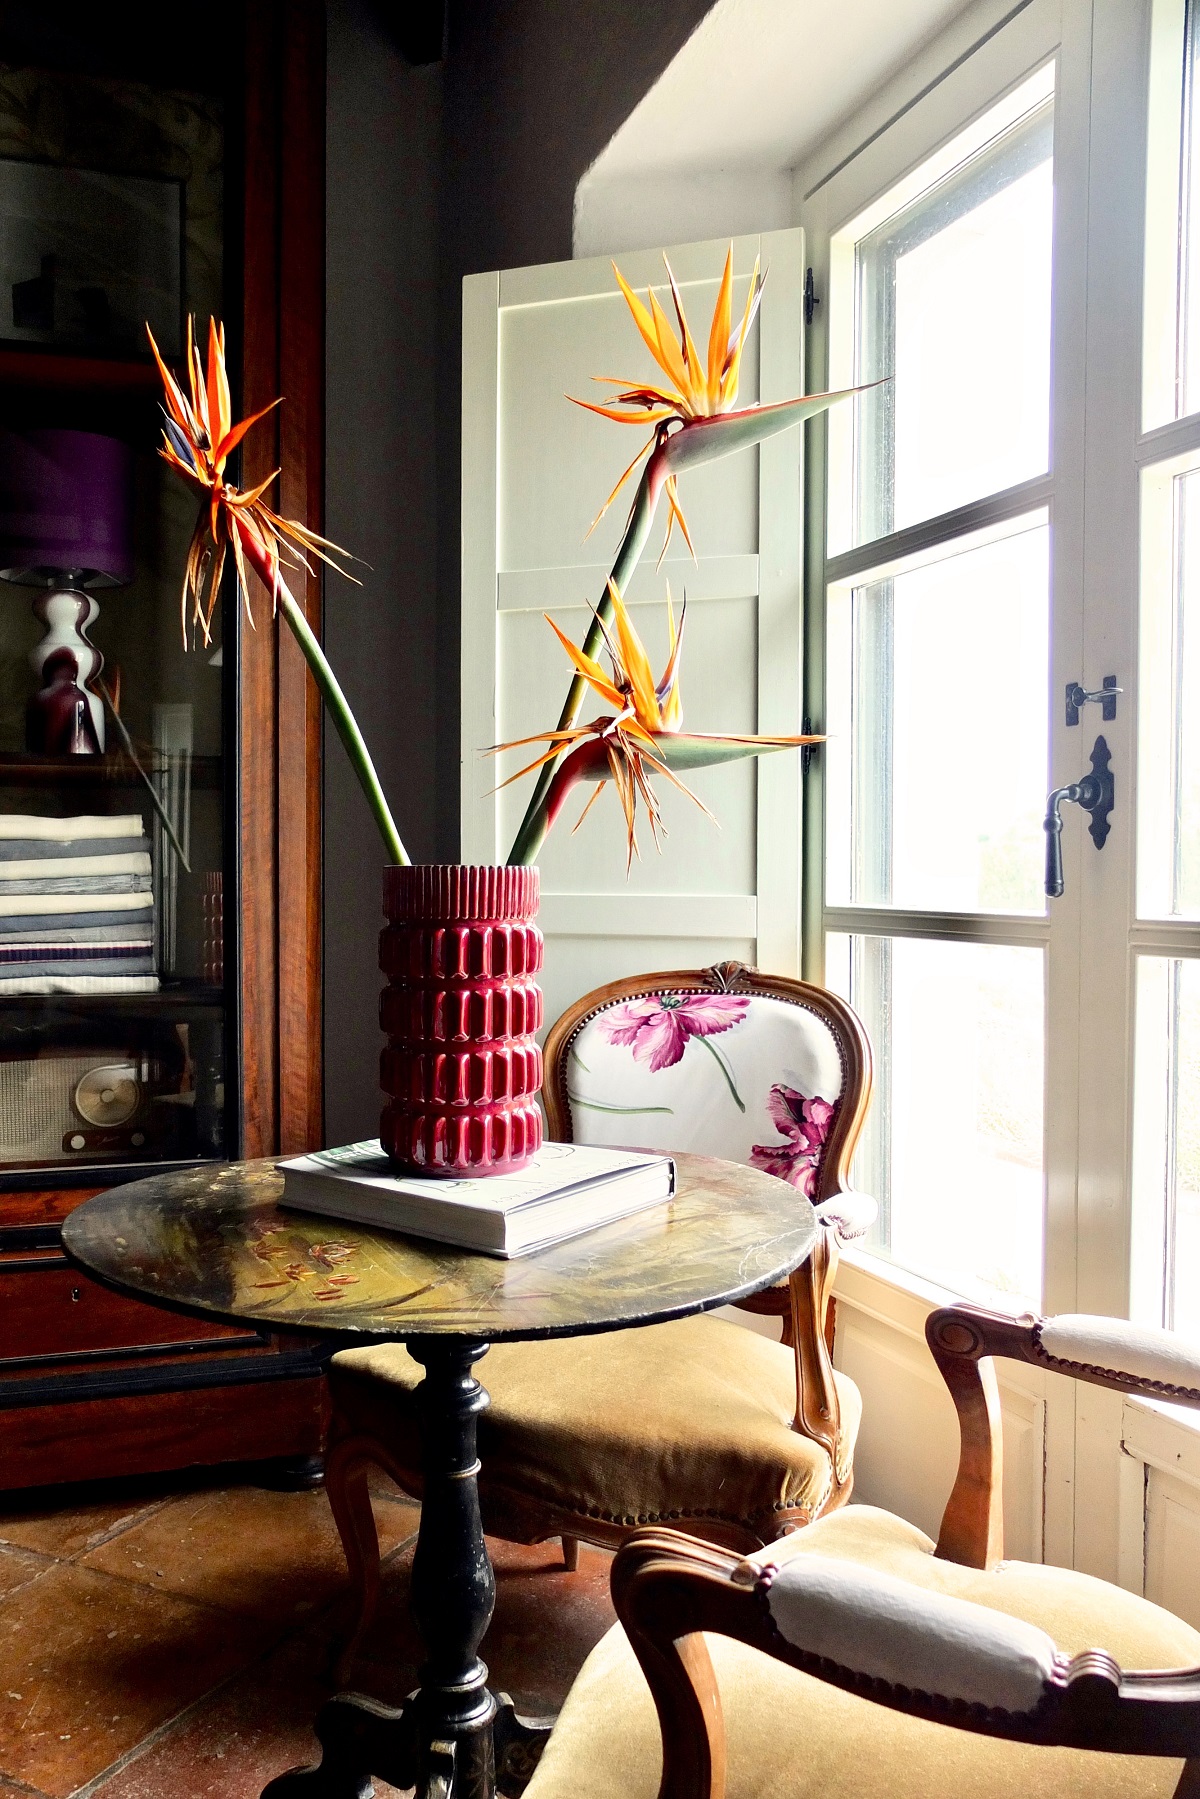 eclectic vintage furniture and bird of paradise flowers in a corner of Finca la Gloria